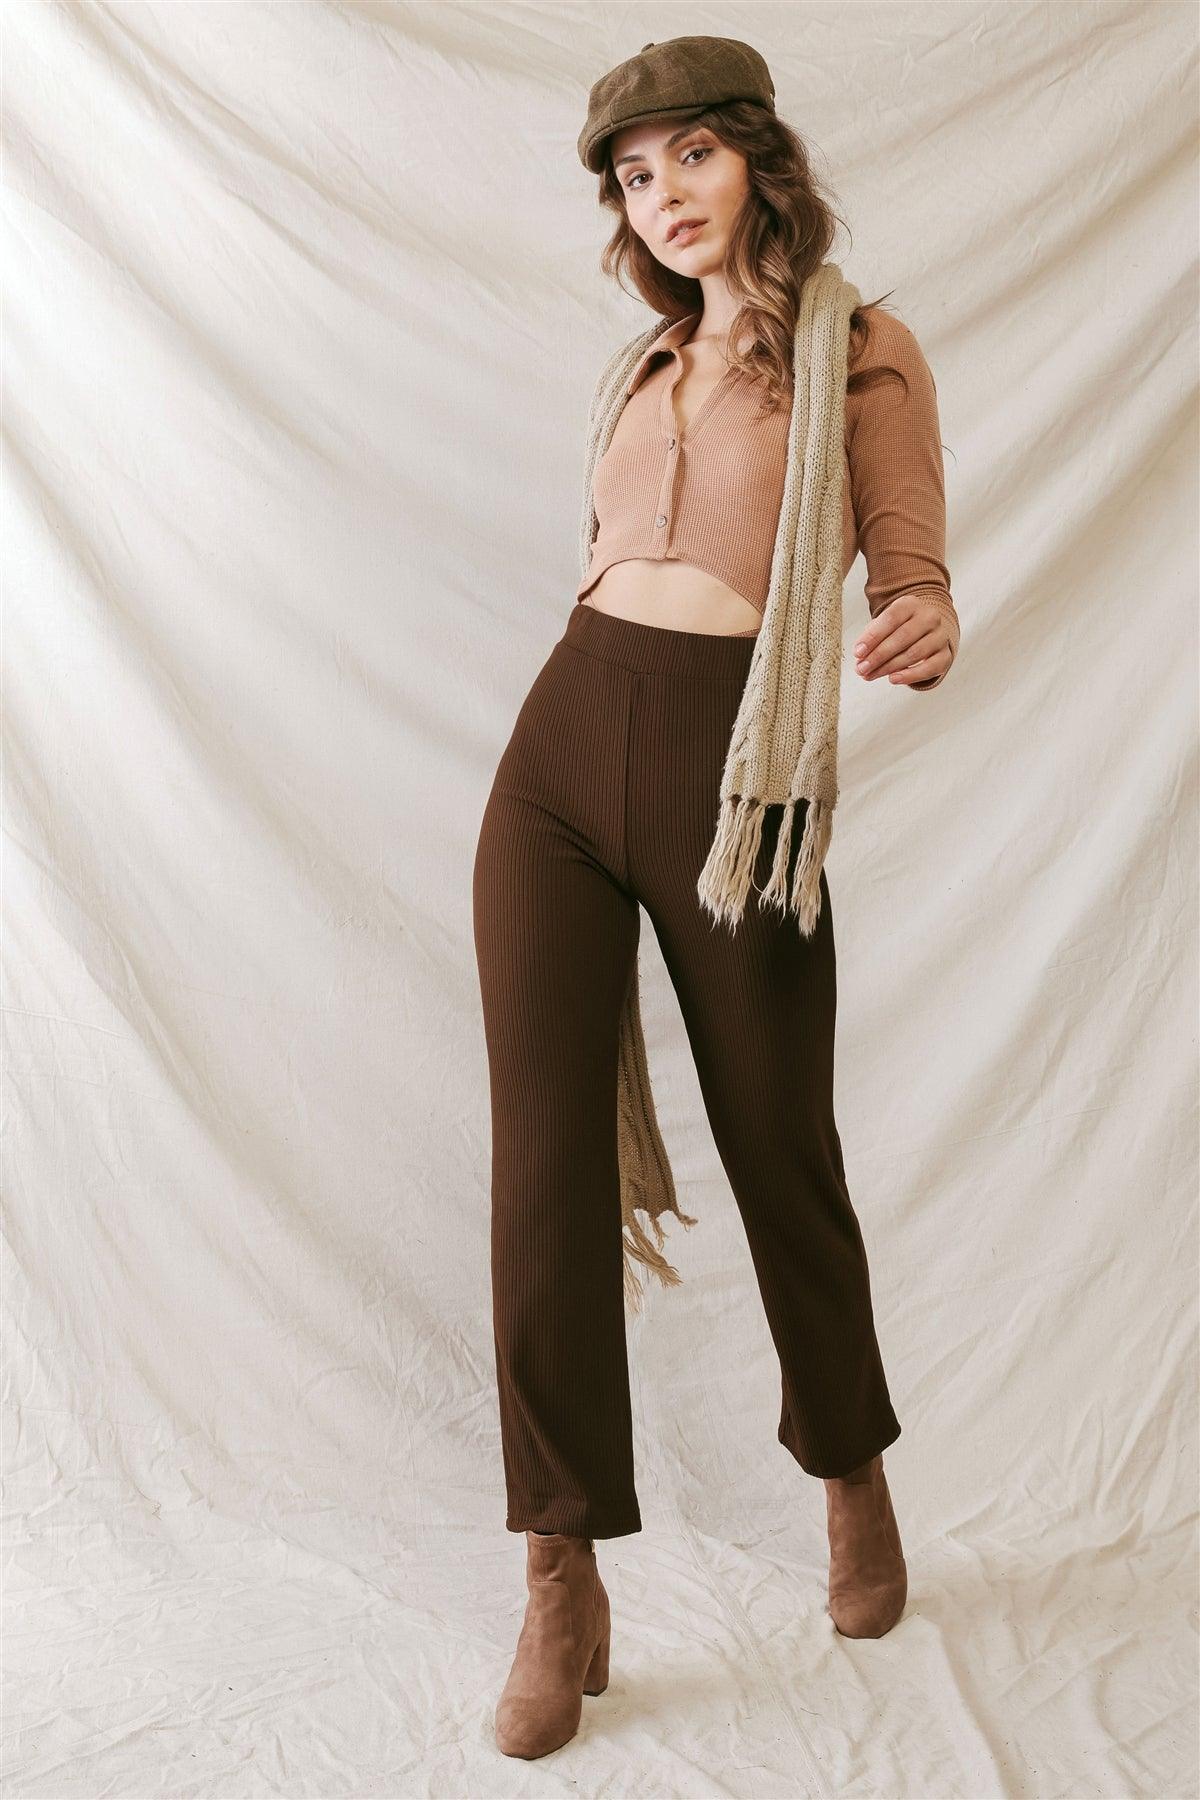 Brown Ribbed High Waist Fitted Pants /3-2-1